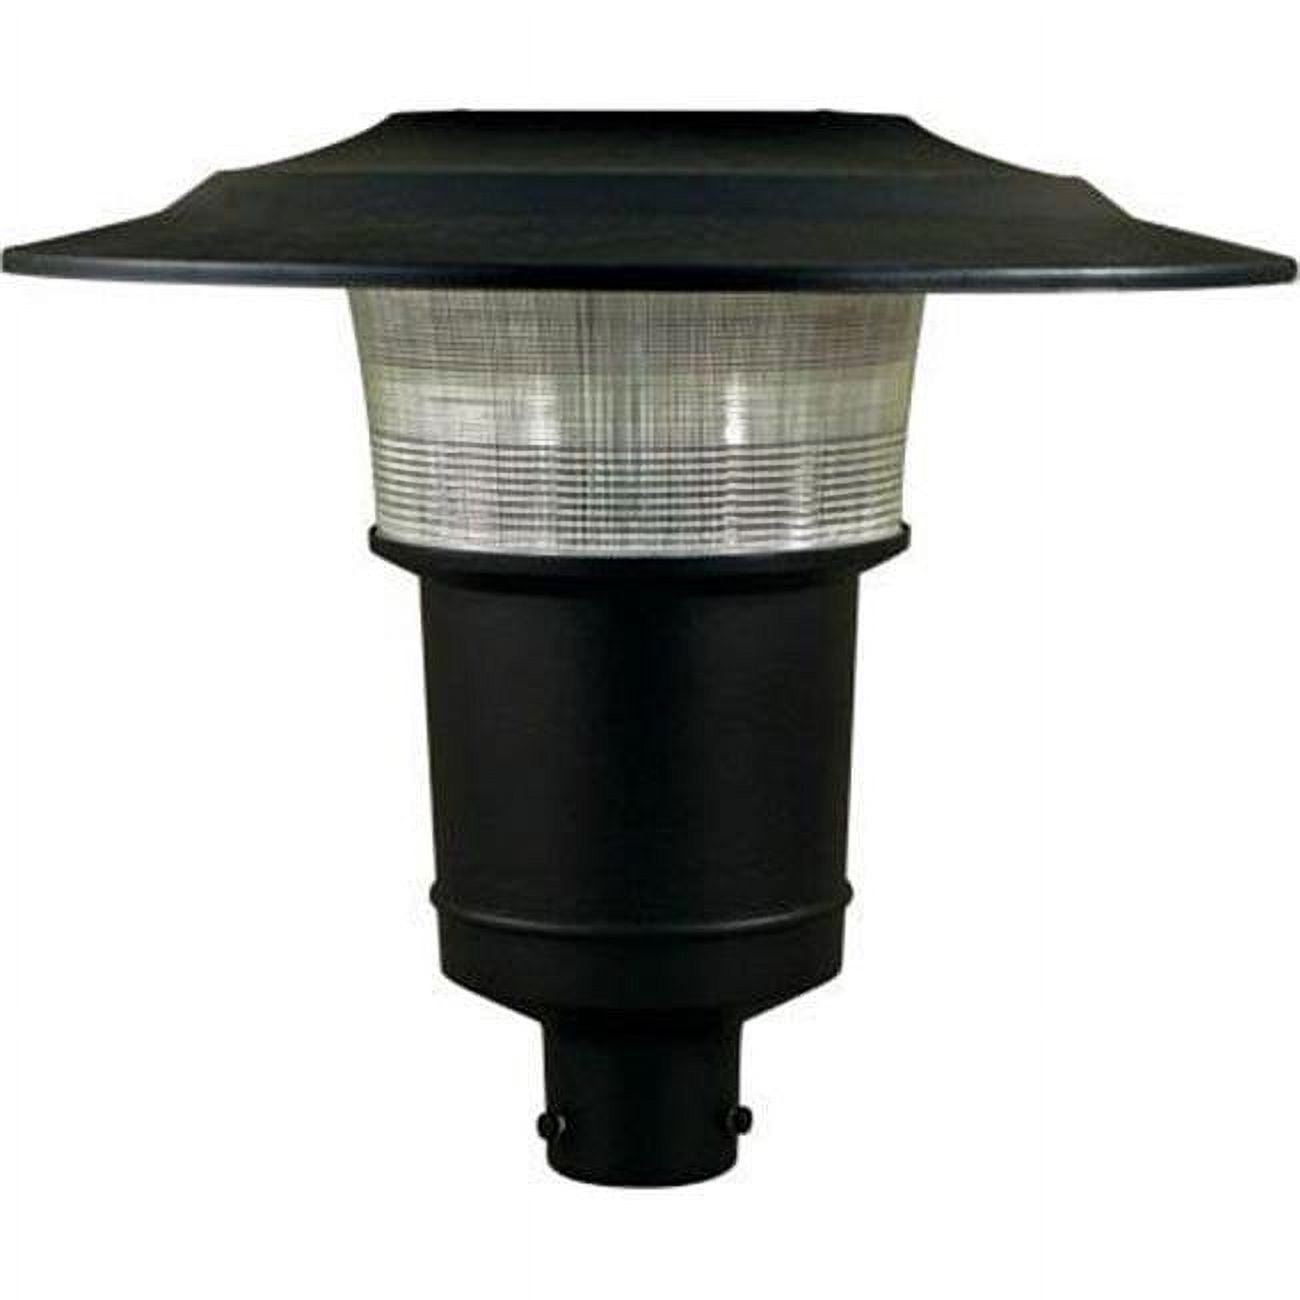 Picture of Dabmar Lighting GM651-B Powder Coated Cast Aluminum Architectural Post Top Light Fixture, Black - 19.50 x 23.13 x 23.13 in.